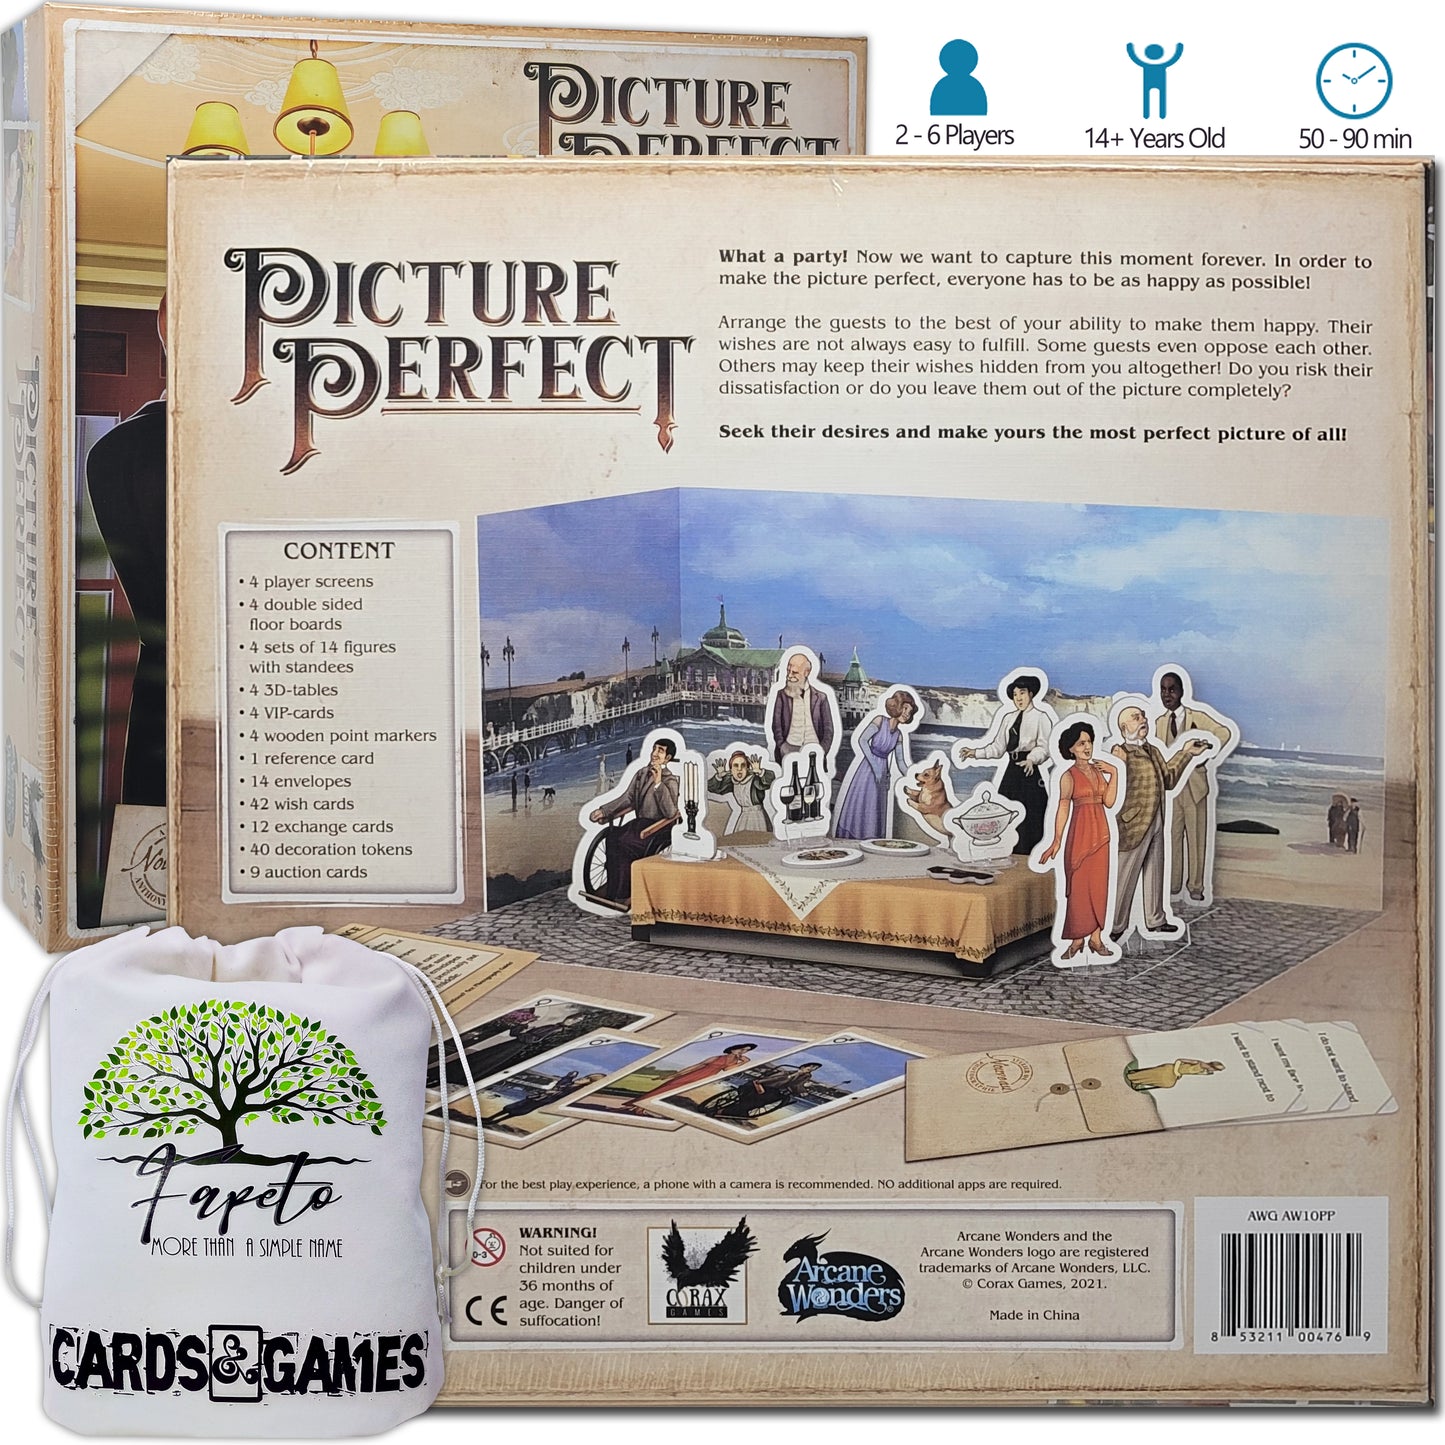 Big Set of Picture Perfect Board Game and The Expansions: 5 - 6 Players, Movie Star, The Pickpocket and The Sherlock Bundle With Random Color Drawstring Bag